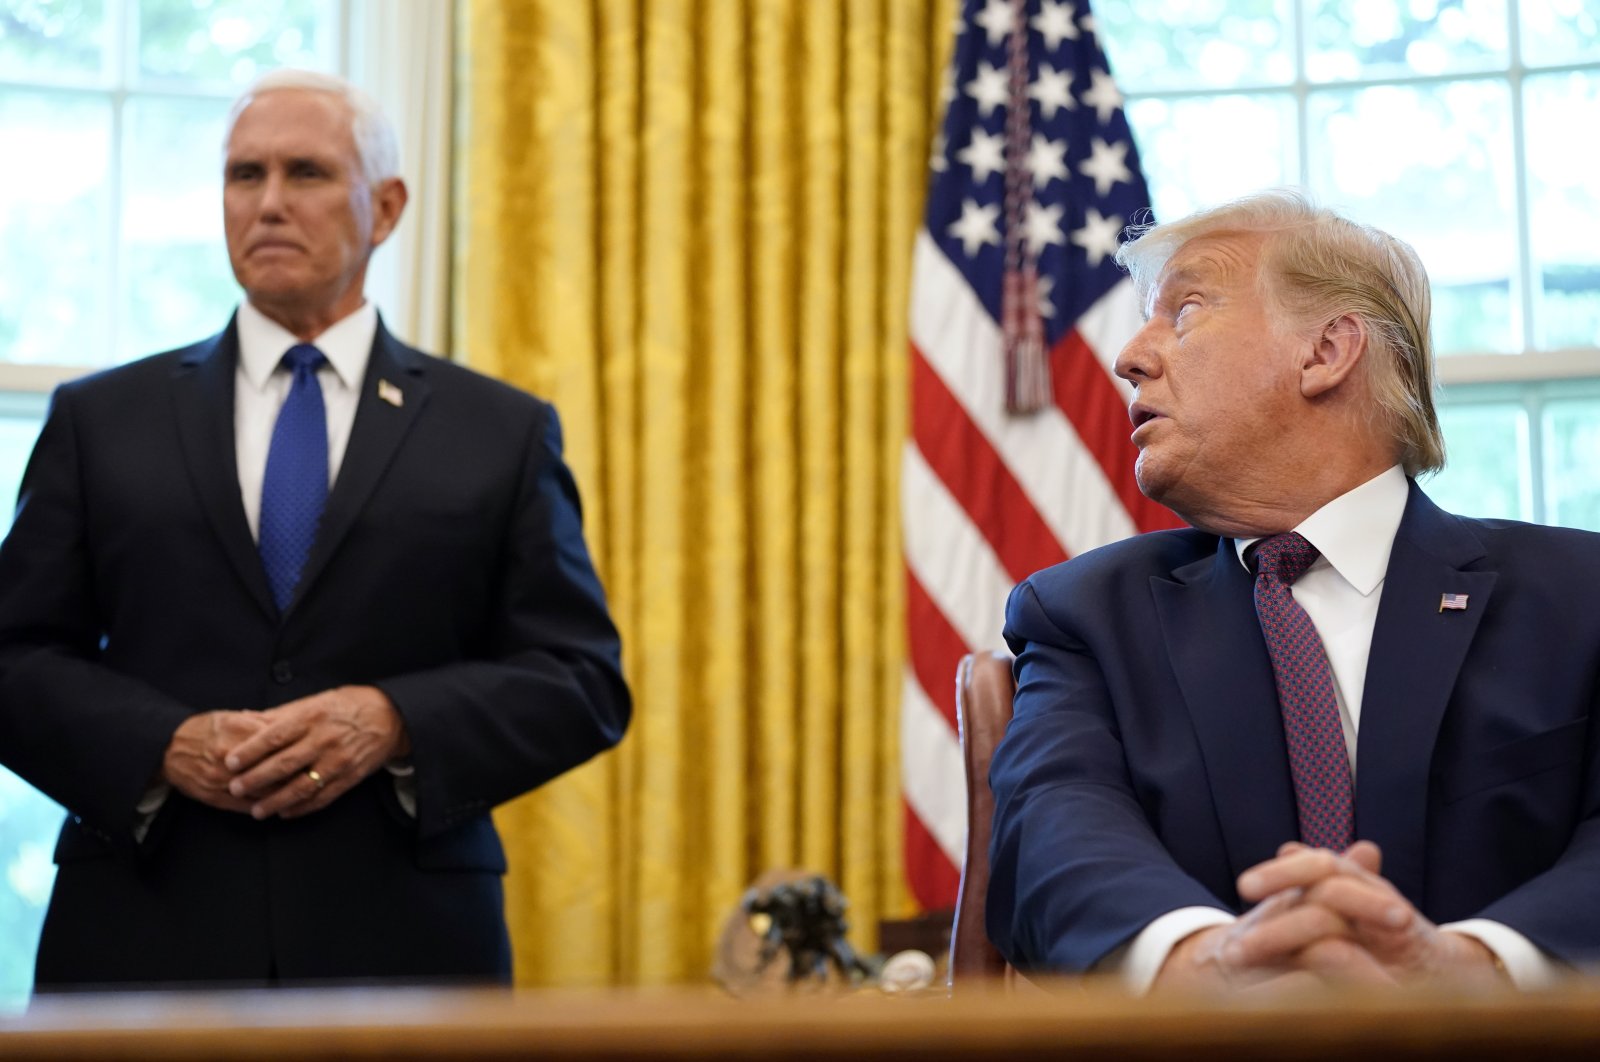 U.S. President Donald Trump looks toward Vice President Mike Pence in the Oval Office of the White House, Washington, D.C., Sept. 11, 2020. (AP Photo)